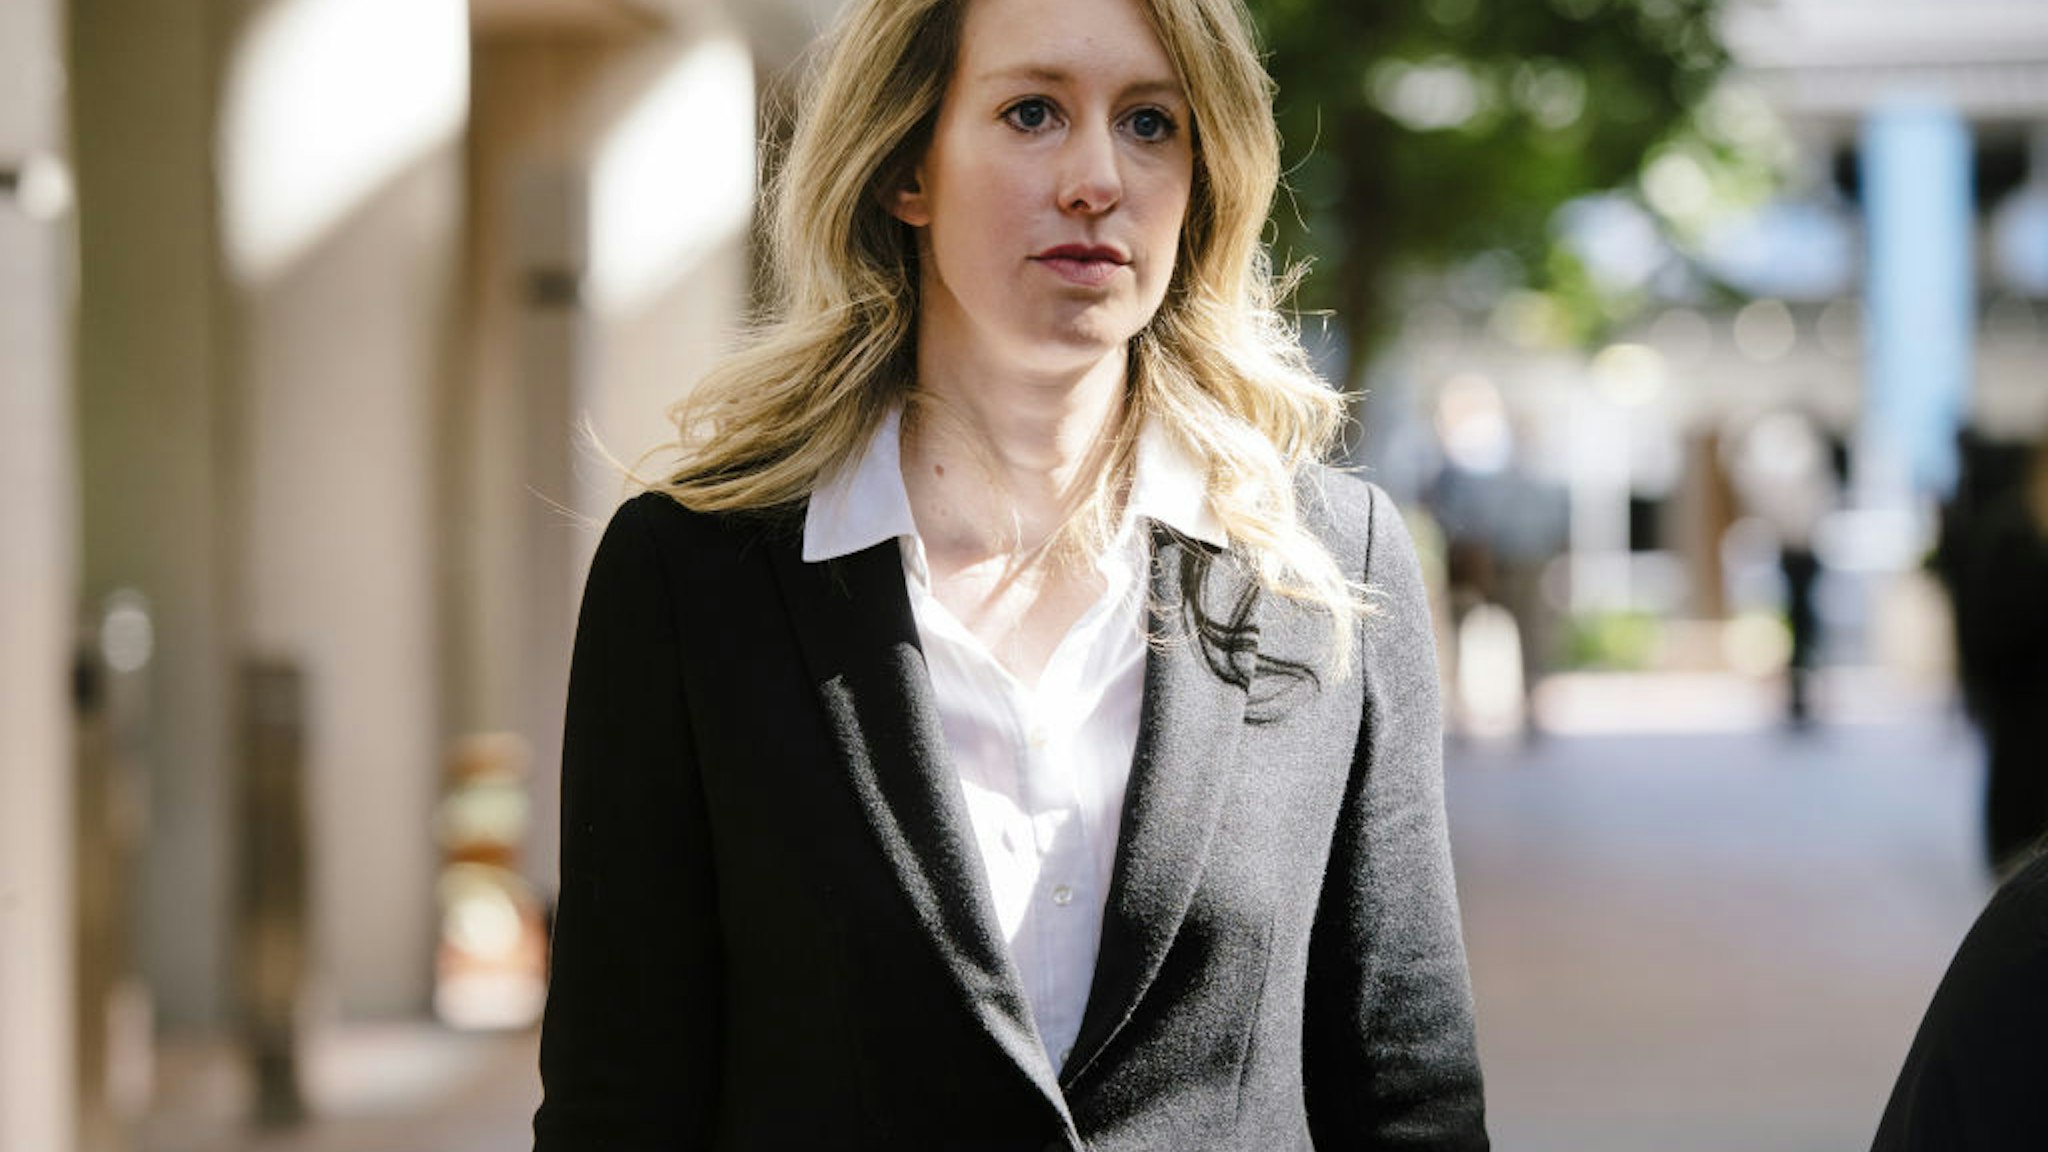 Elizabeth Holmes, founder and former chief executive officer of Theranos Inc., leaves federal court in San Jose, California, U.S., on Wednesday, Oct. 2, 2019.